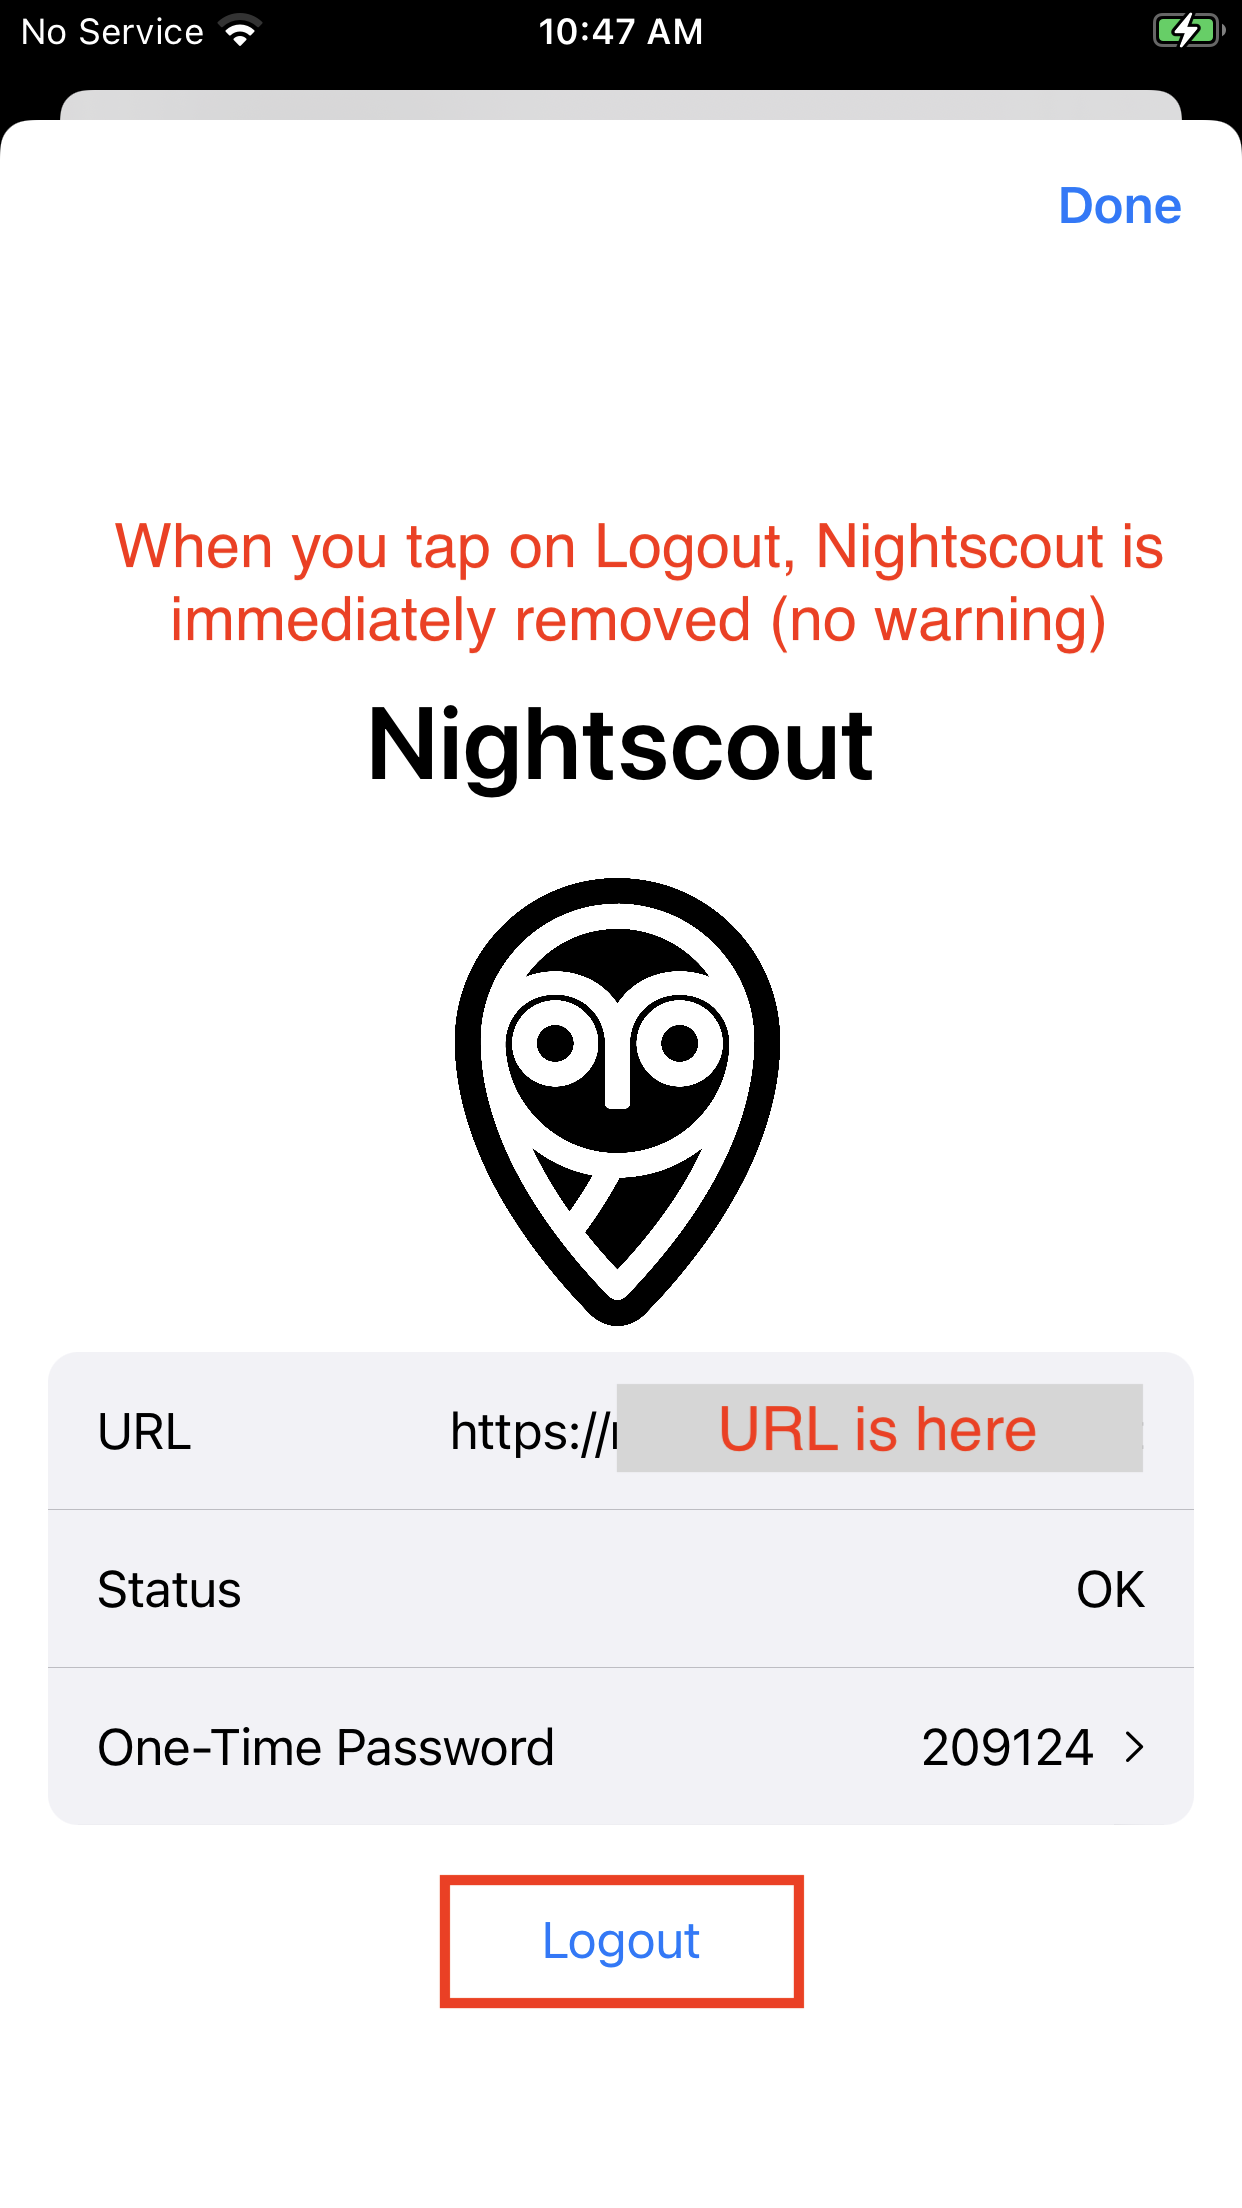 steps to remove Nightscout from the Loop app